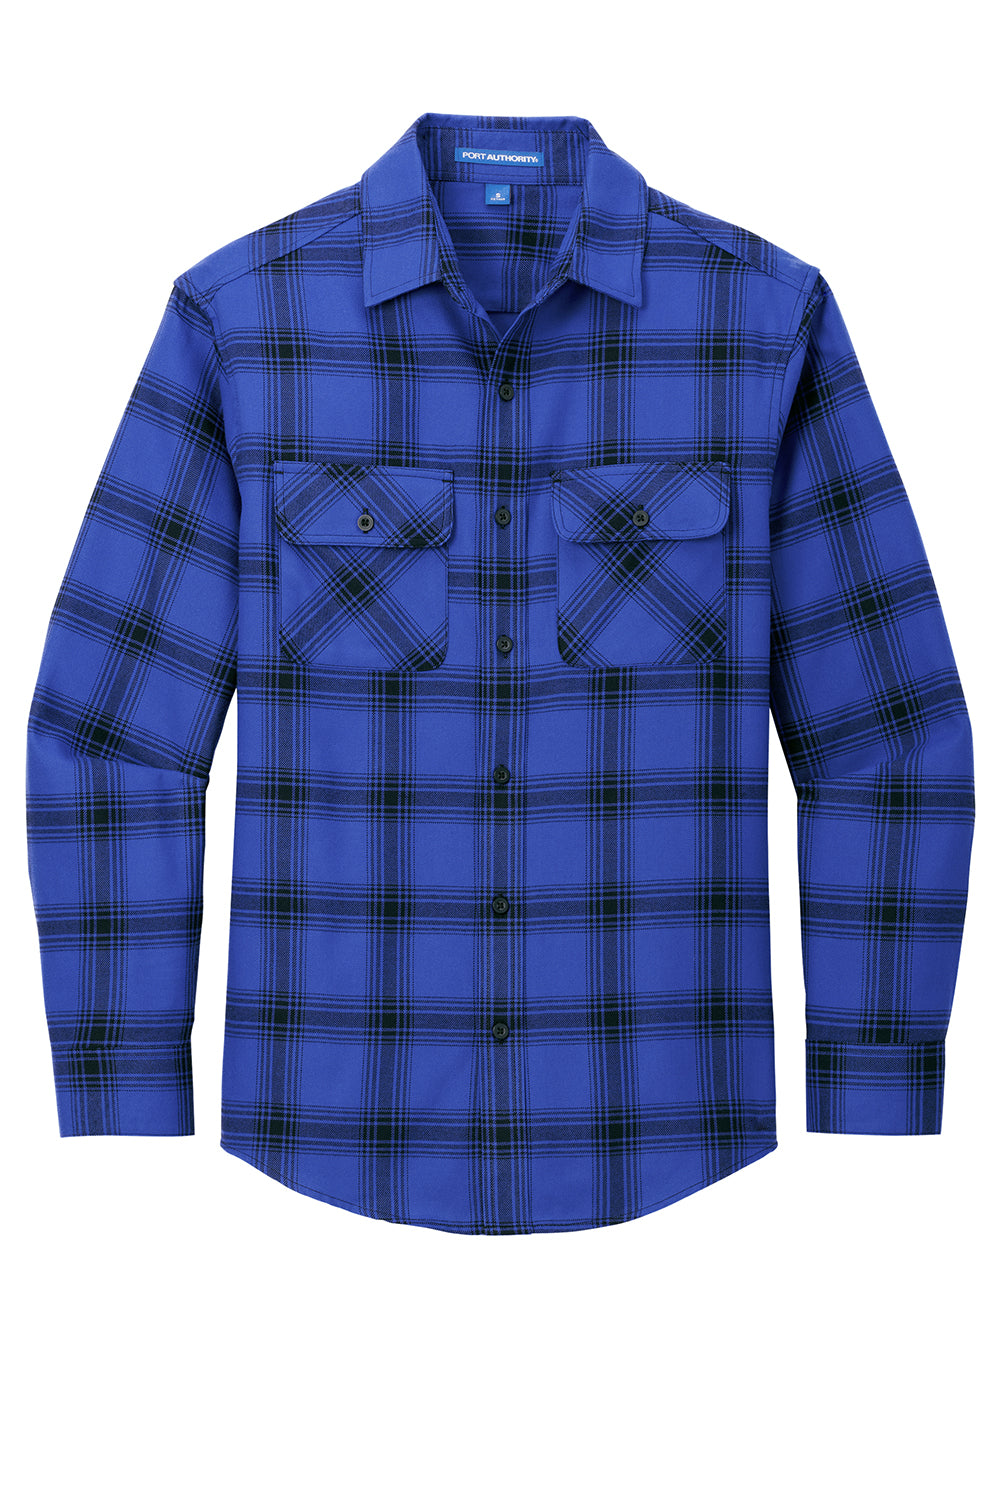 Port Authority W668 Mens Flannel Long Sleeve Button Down Shirt w/ Double Pockets Royal/Black Plaid Flat Front